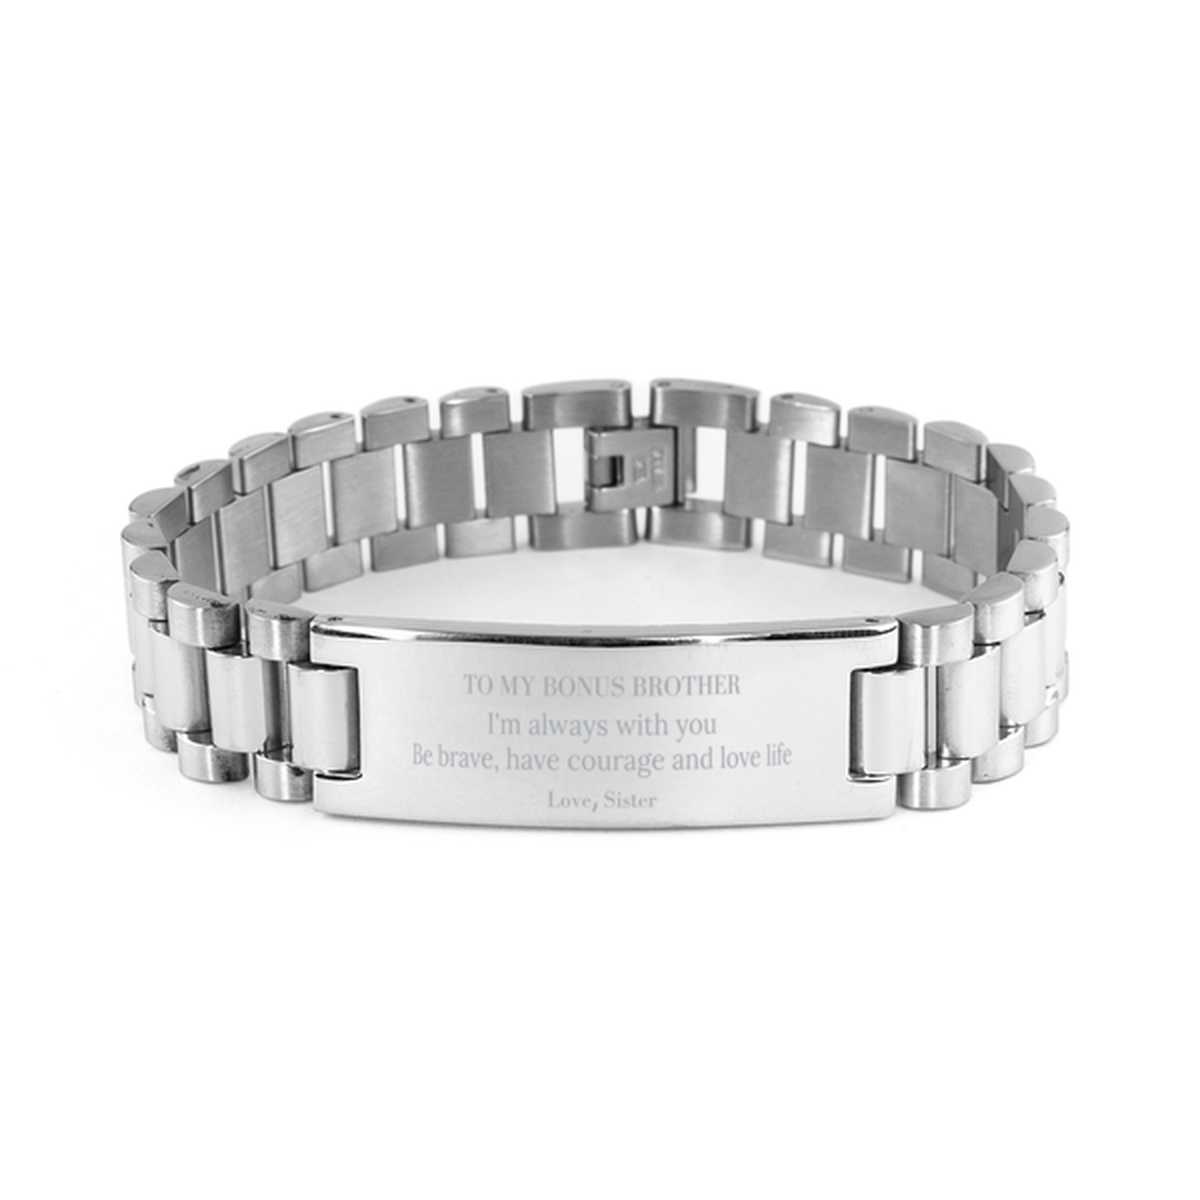 To My Bonus Brother Gifts from Sister, Unique Ladder Stainless Steel Bracelet Inspirational Christmas Birthday Graduation Gifts for Bonus Brother I'm always with you. Be brave, have courage and love life. Love, Sister